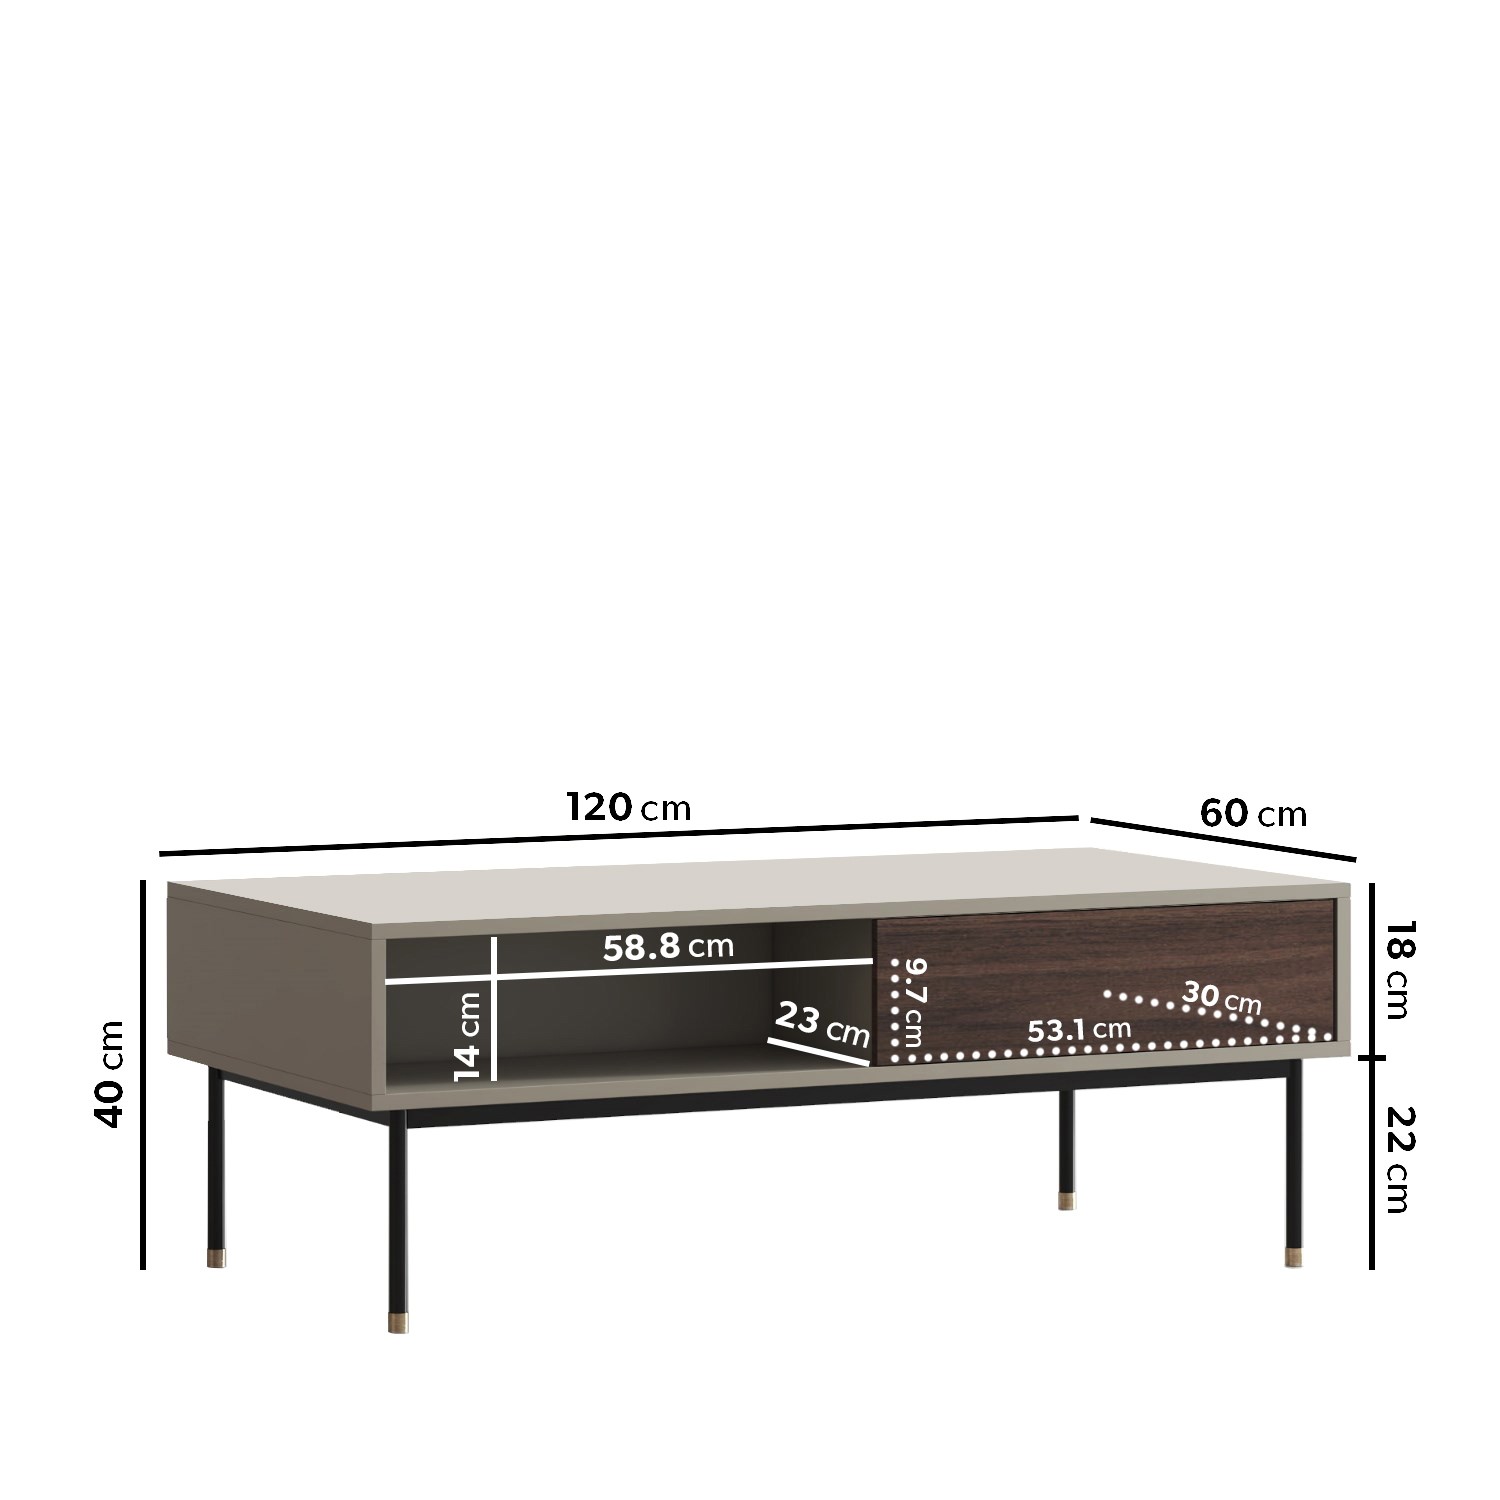 Read more about Large rectangle taupe coffee table with 2 drawers kallen